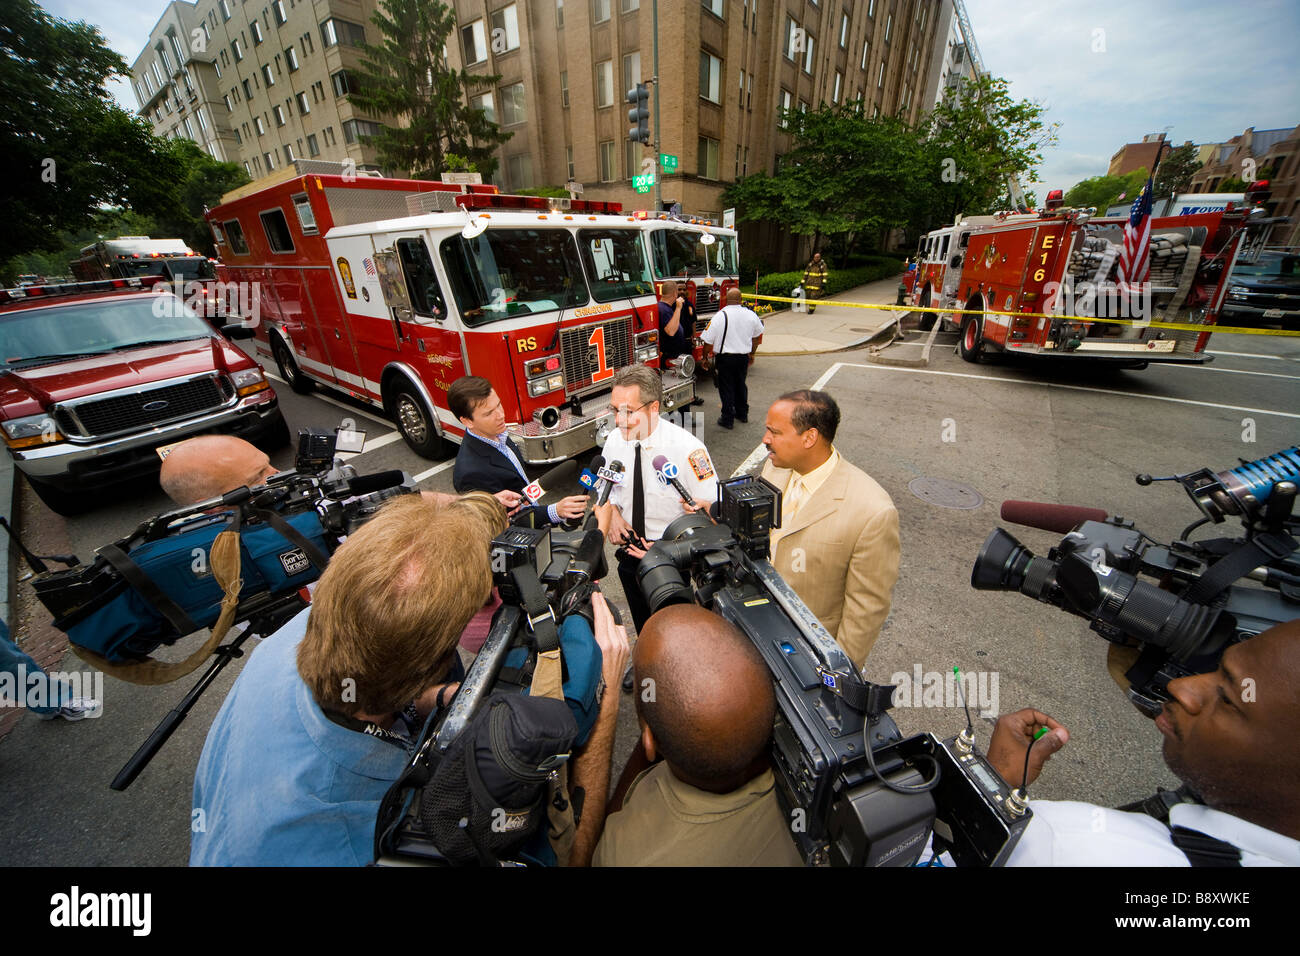 TV news teams filming a spokesperson for the DC Fire Department. Fire in Foggy Bottom, 20 & F NW Washington DC. May 2006. Stock Photo